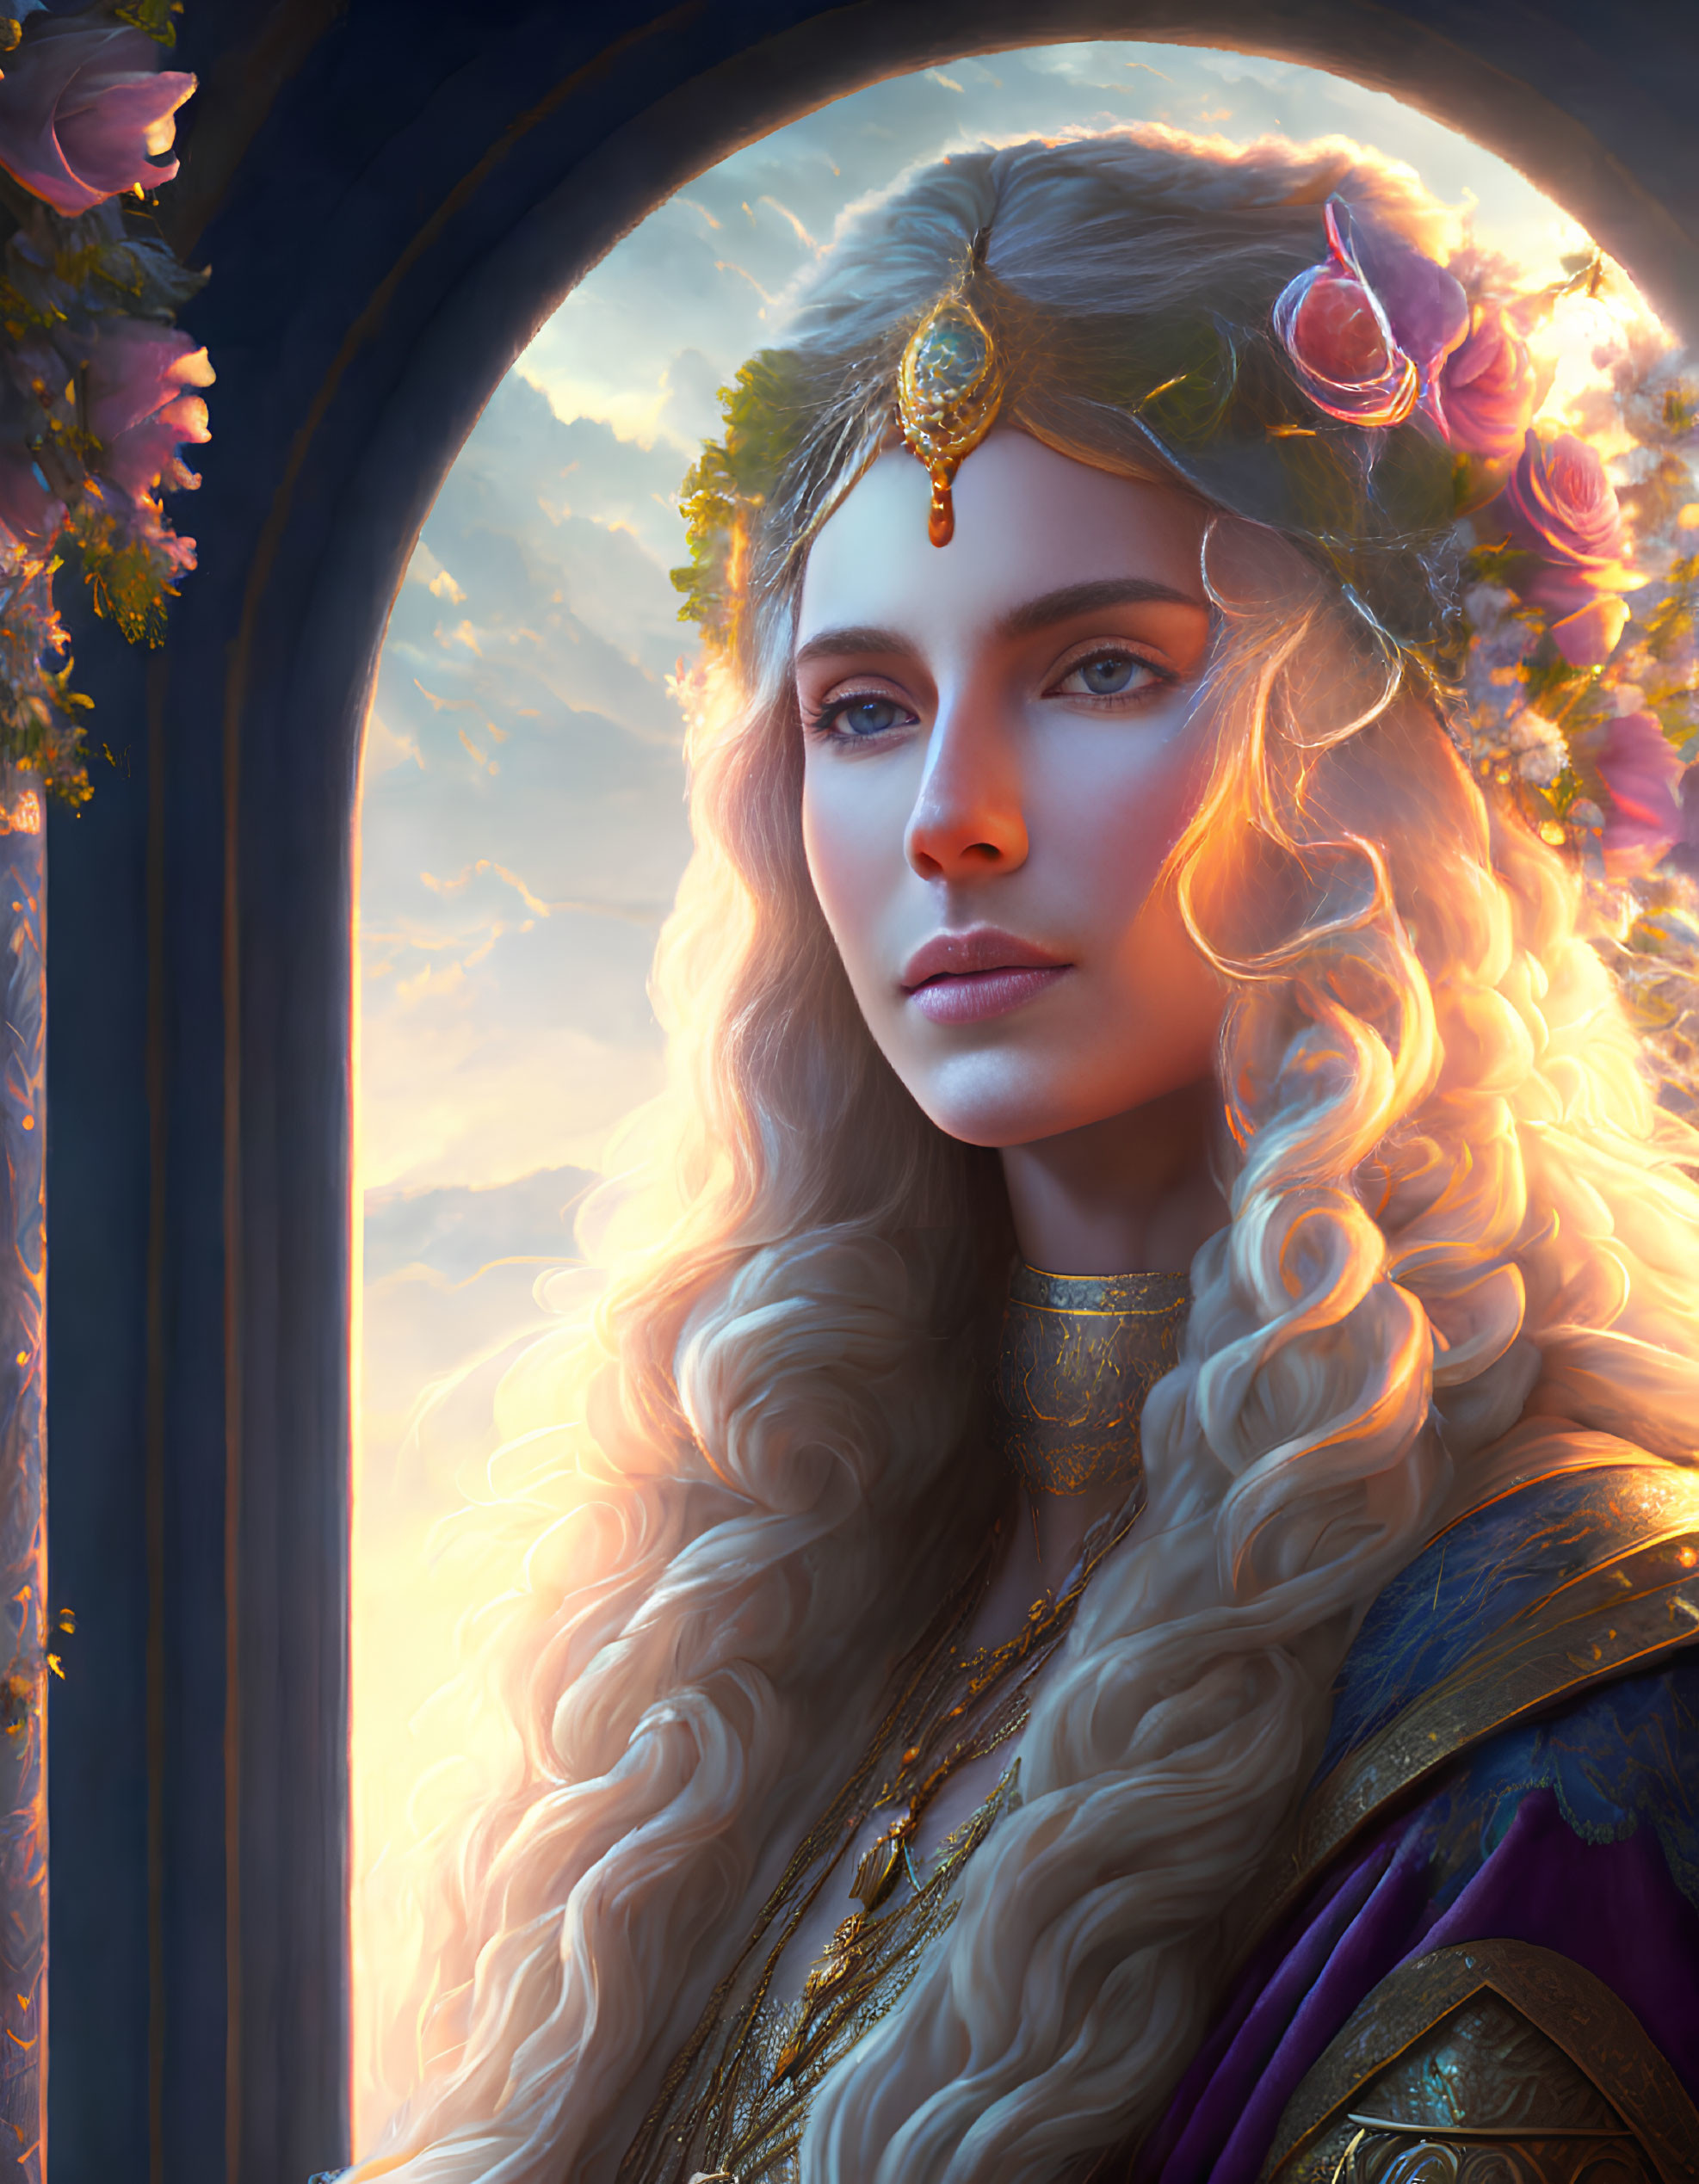 Ethereal woman with golden hair and regal crown in ornate robes